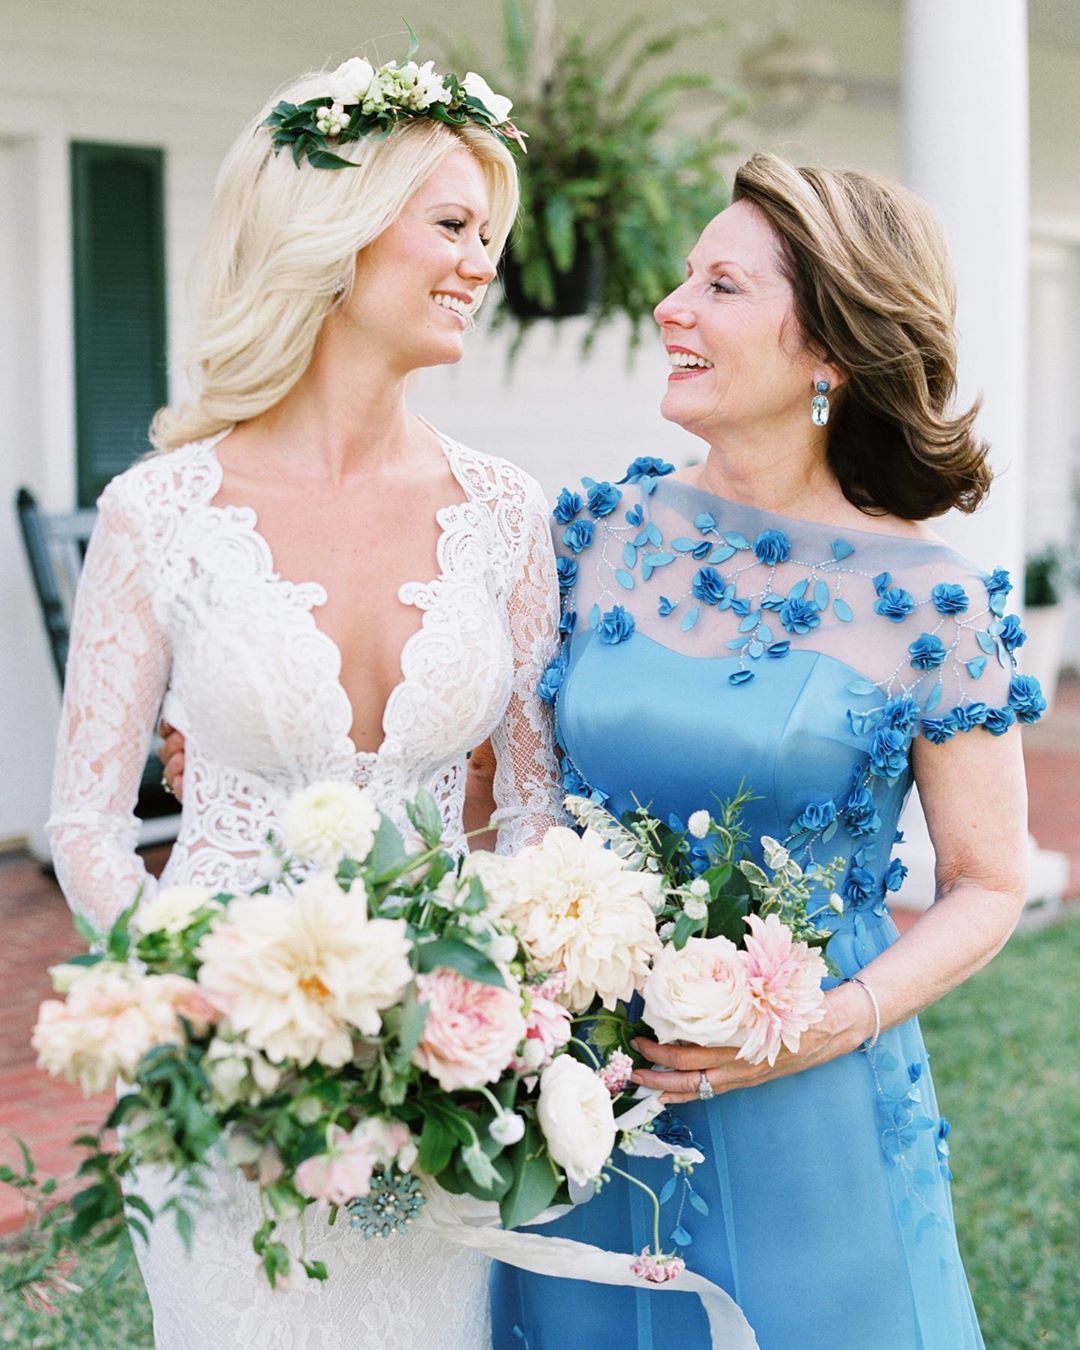 How To Choose The Mother of the Bride Dress ⋆ Ruffled